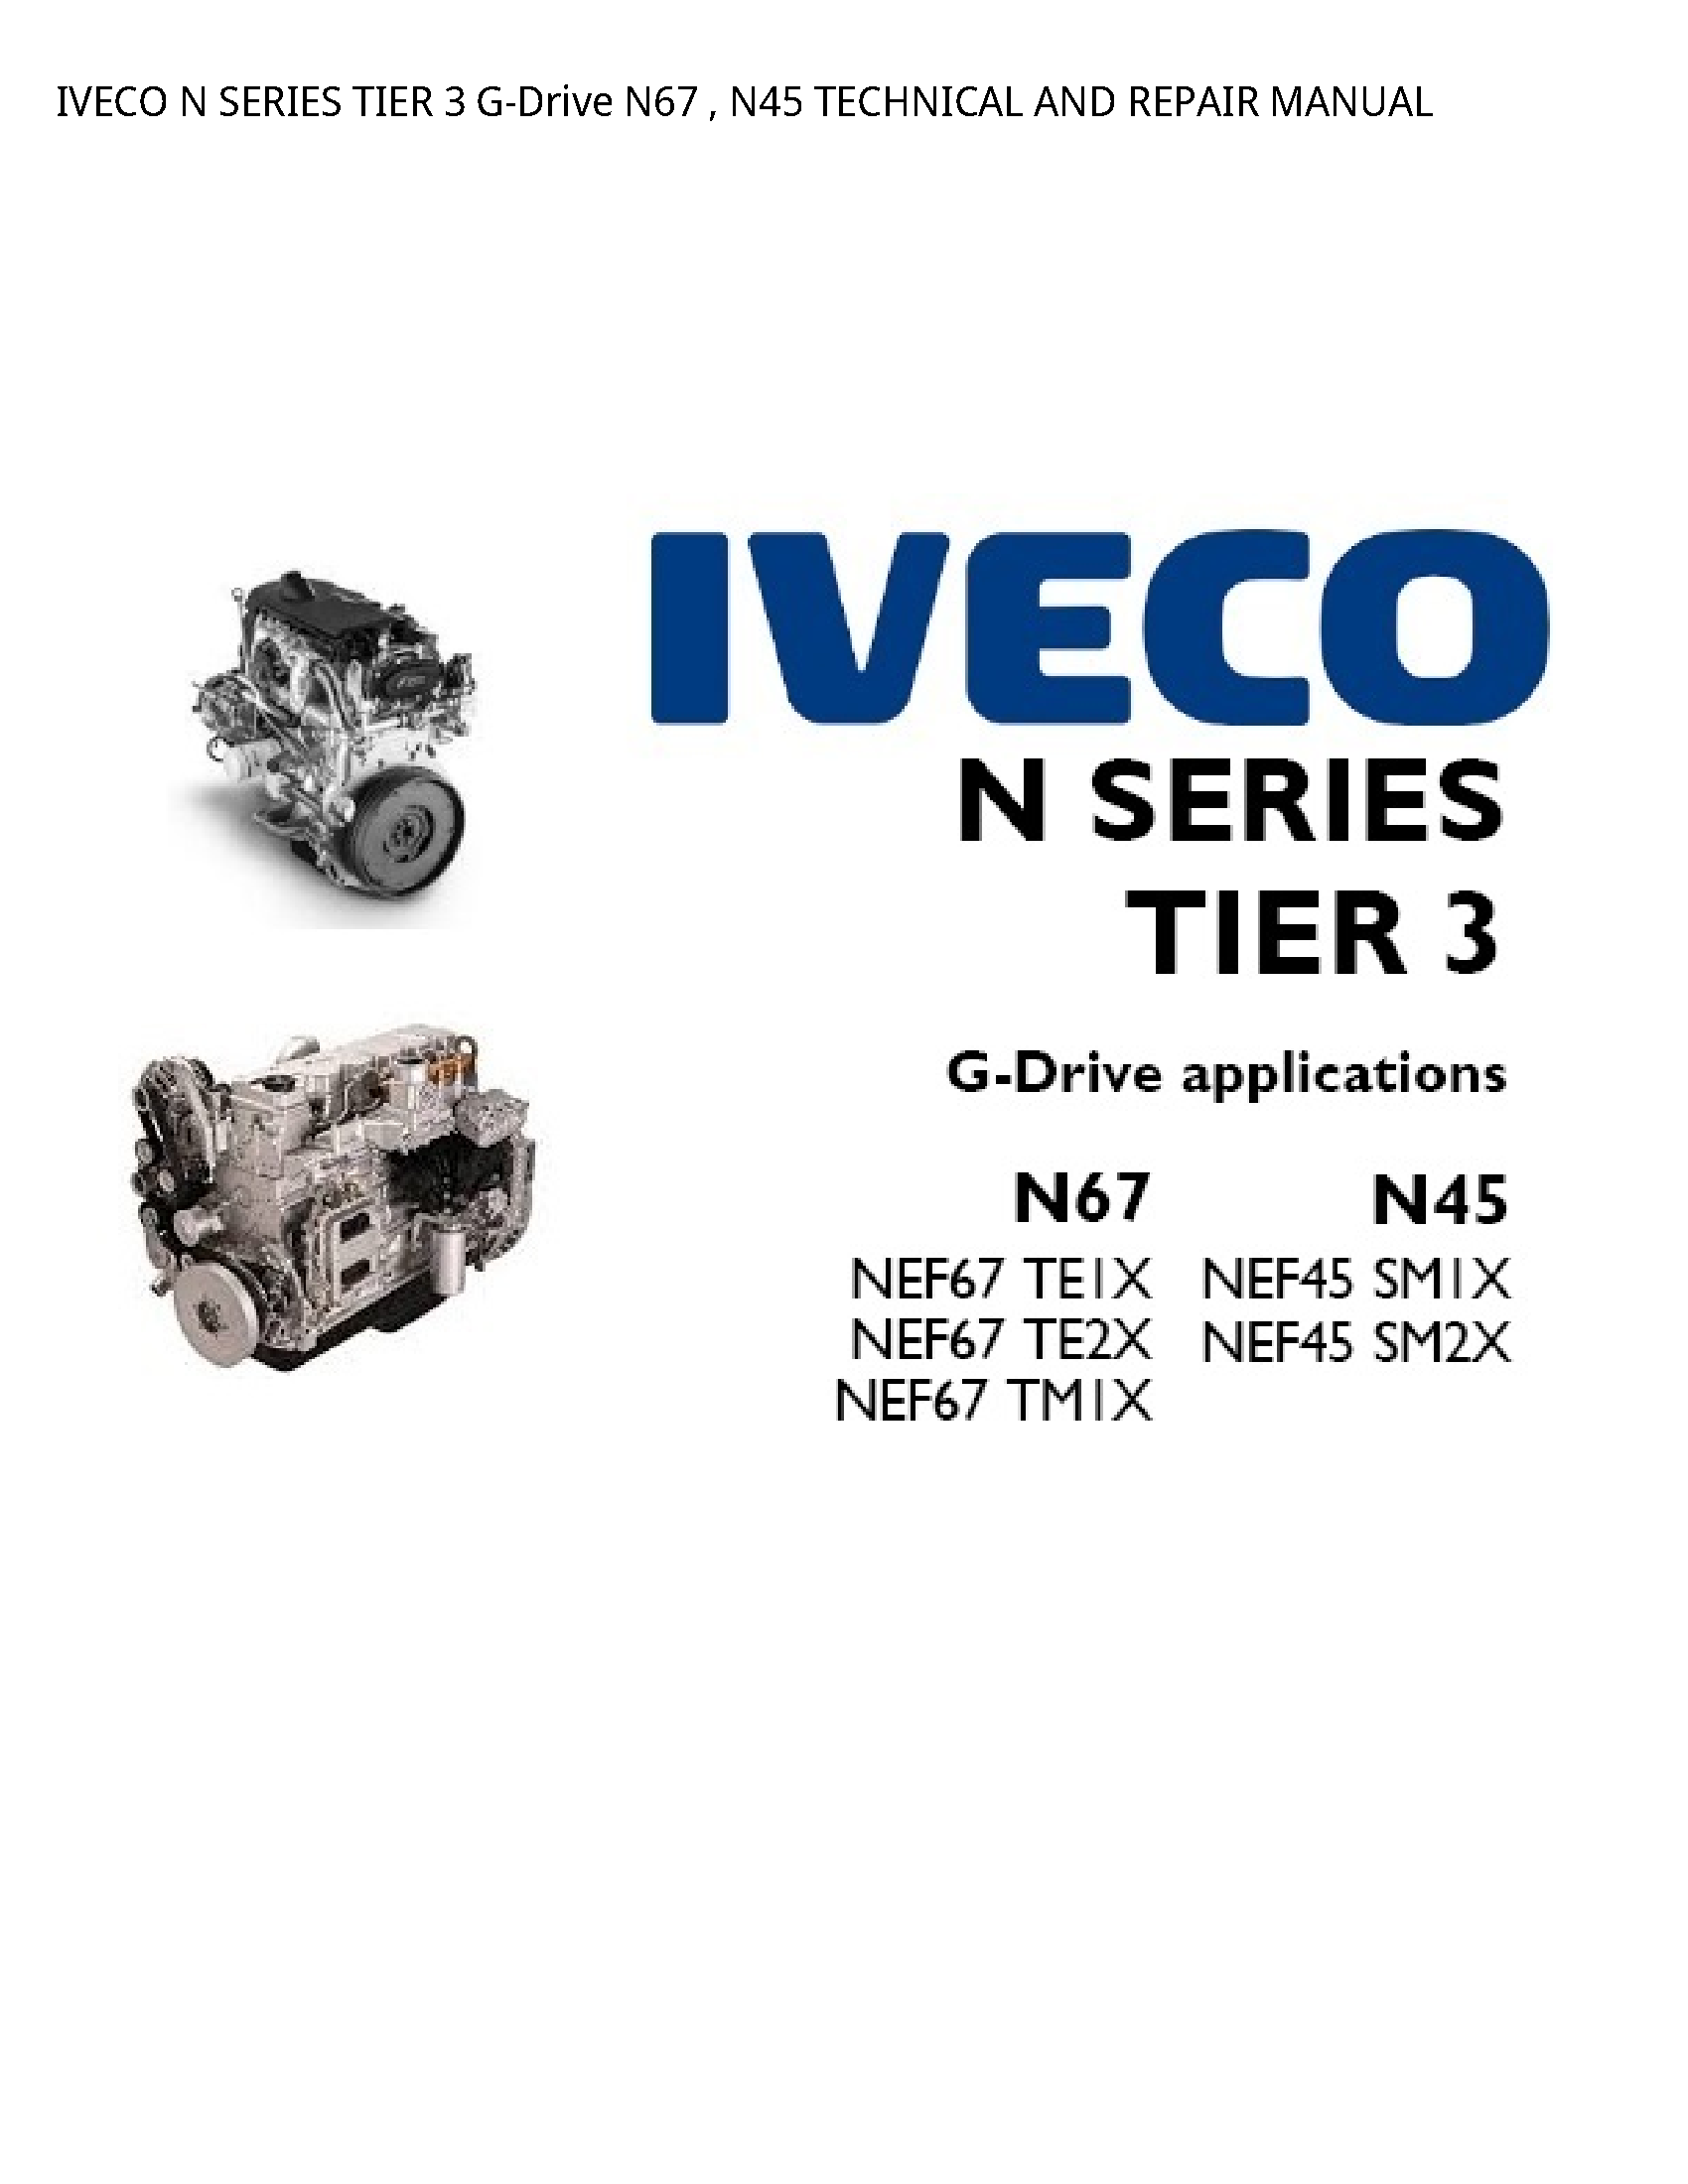 Iveco 3 SERIES TIER G-Drive TECHNICAL AND REPAIR manual